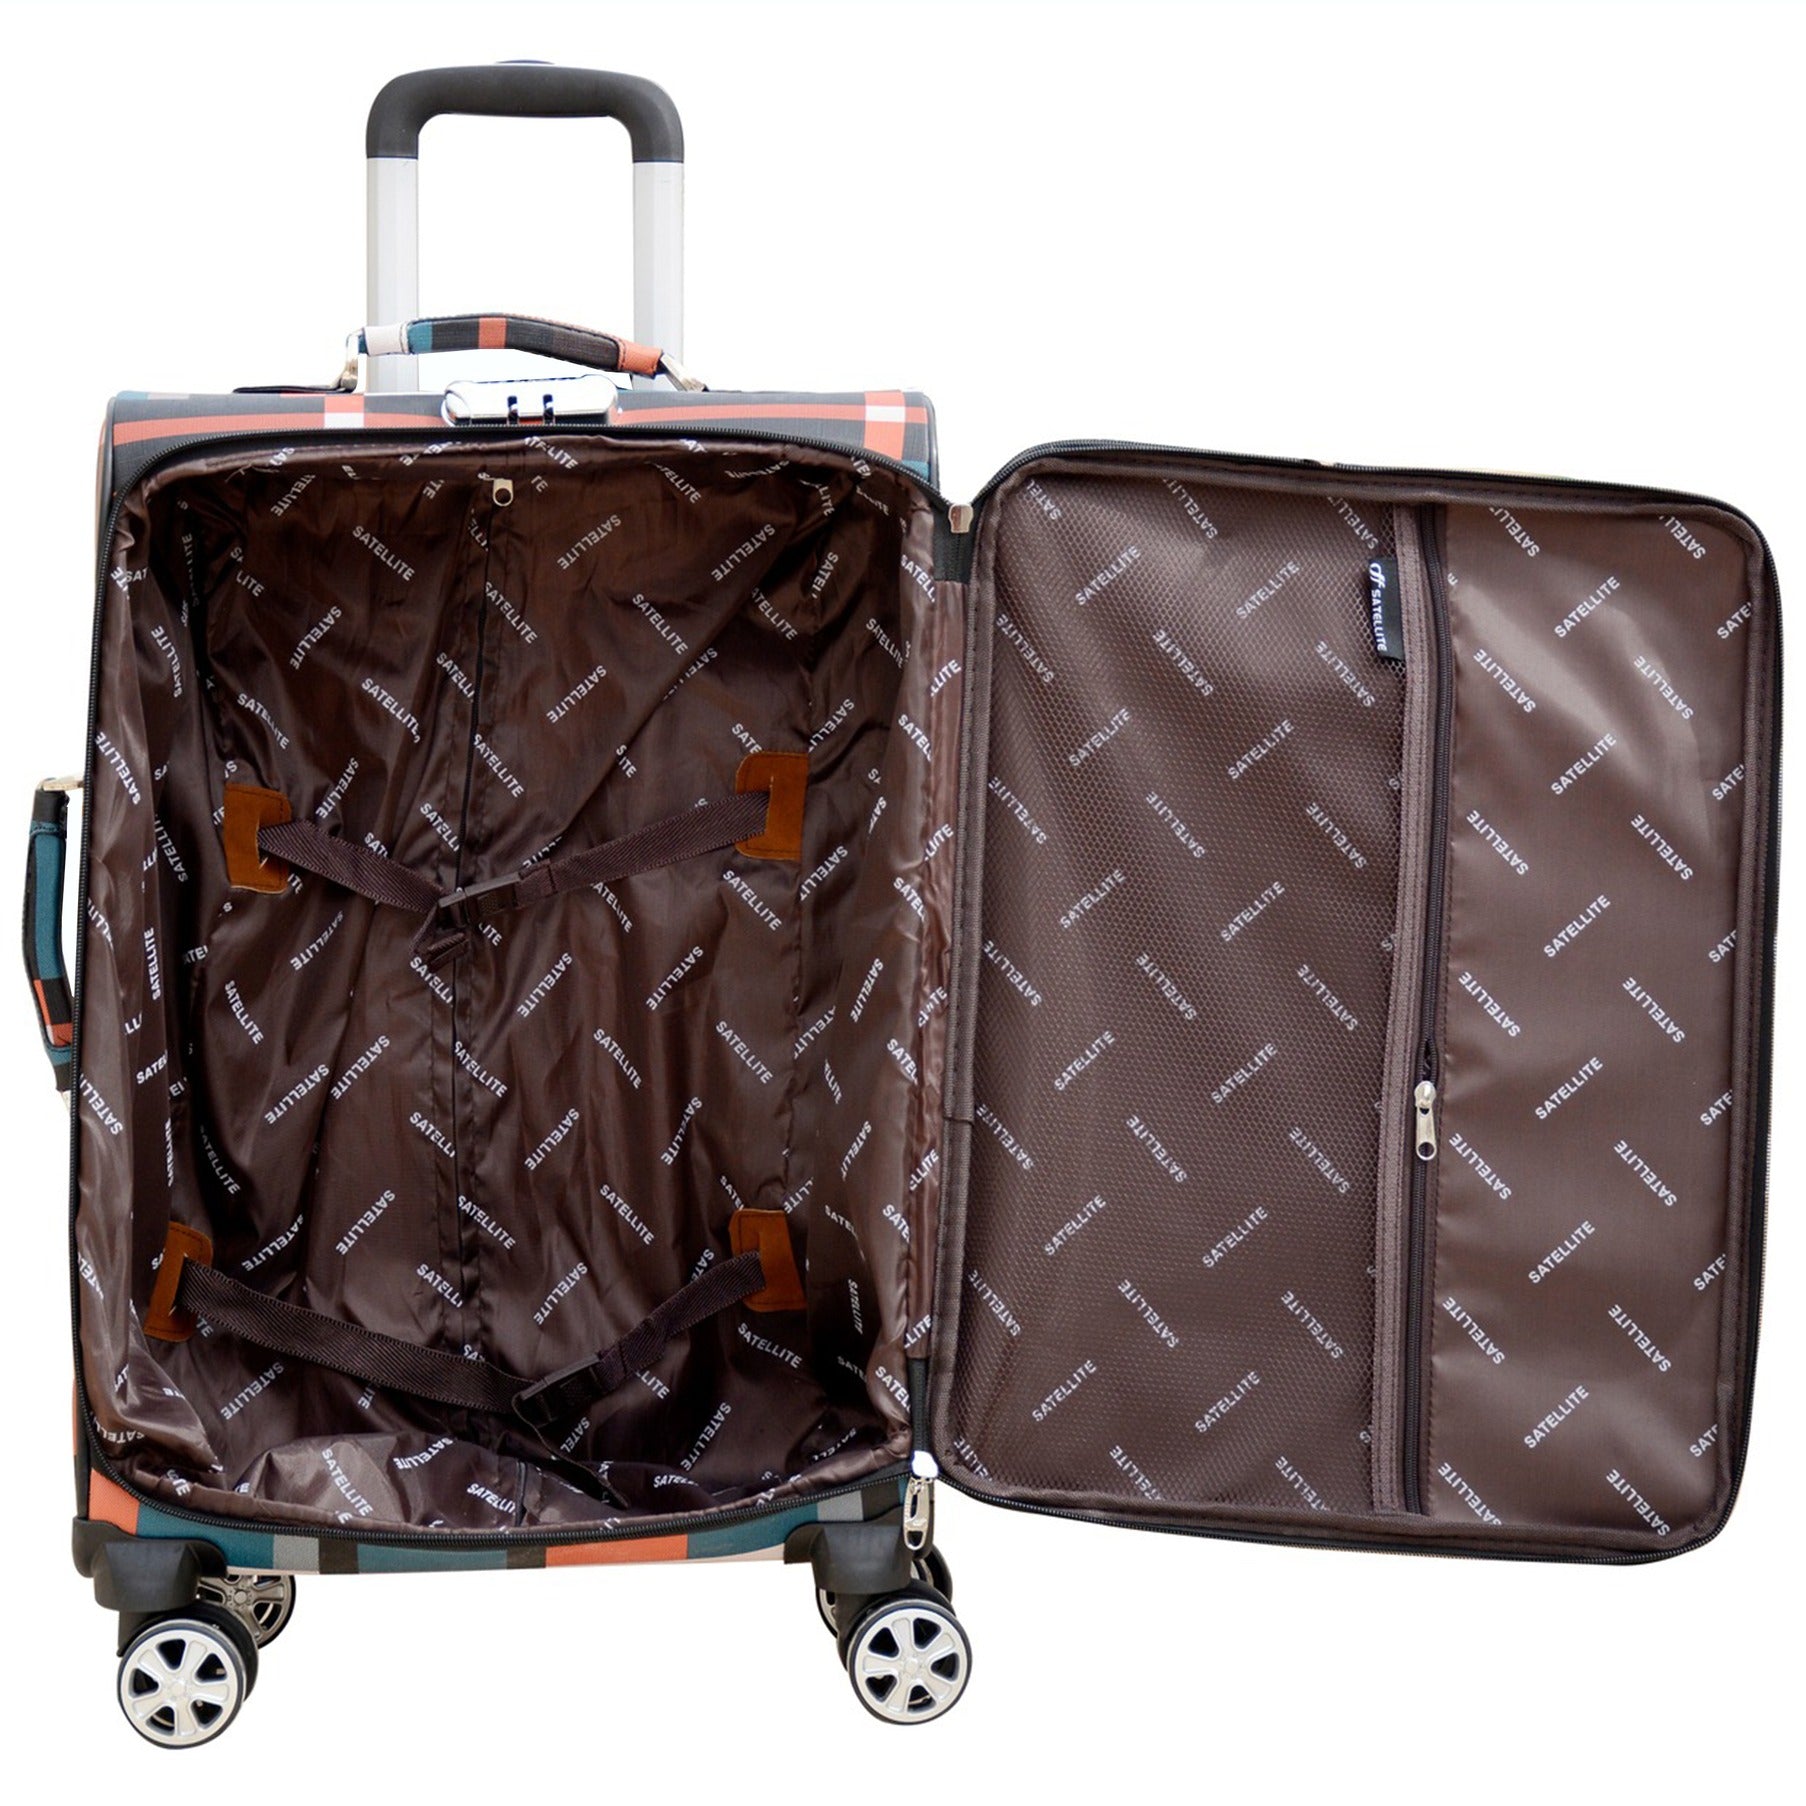 4 Piece Full Set 7" 20" 24" 28 Inches PU Check Type Luggage Lightweight Soft Material Trolley Bag with Spinner wheel